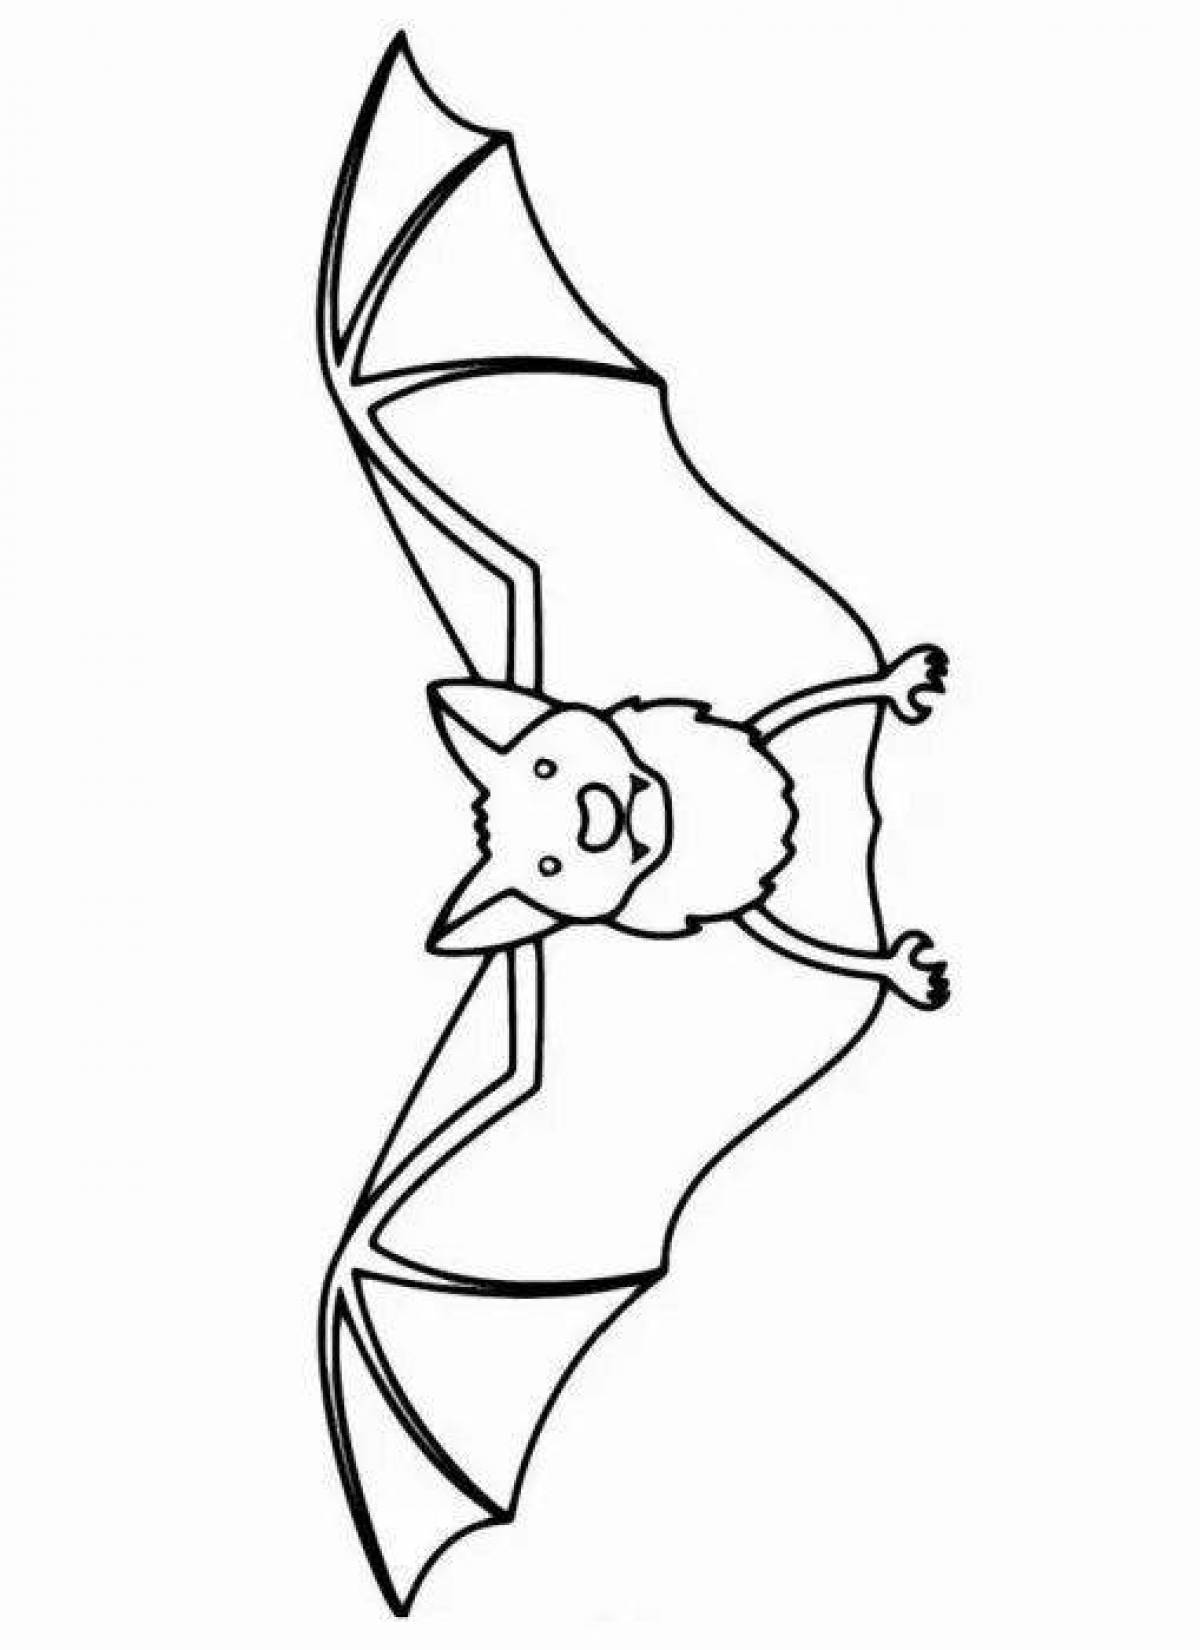 Adorable bat coloring pages for kids